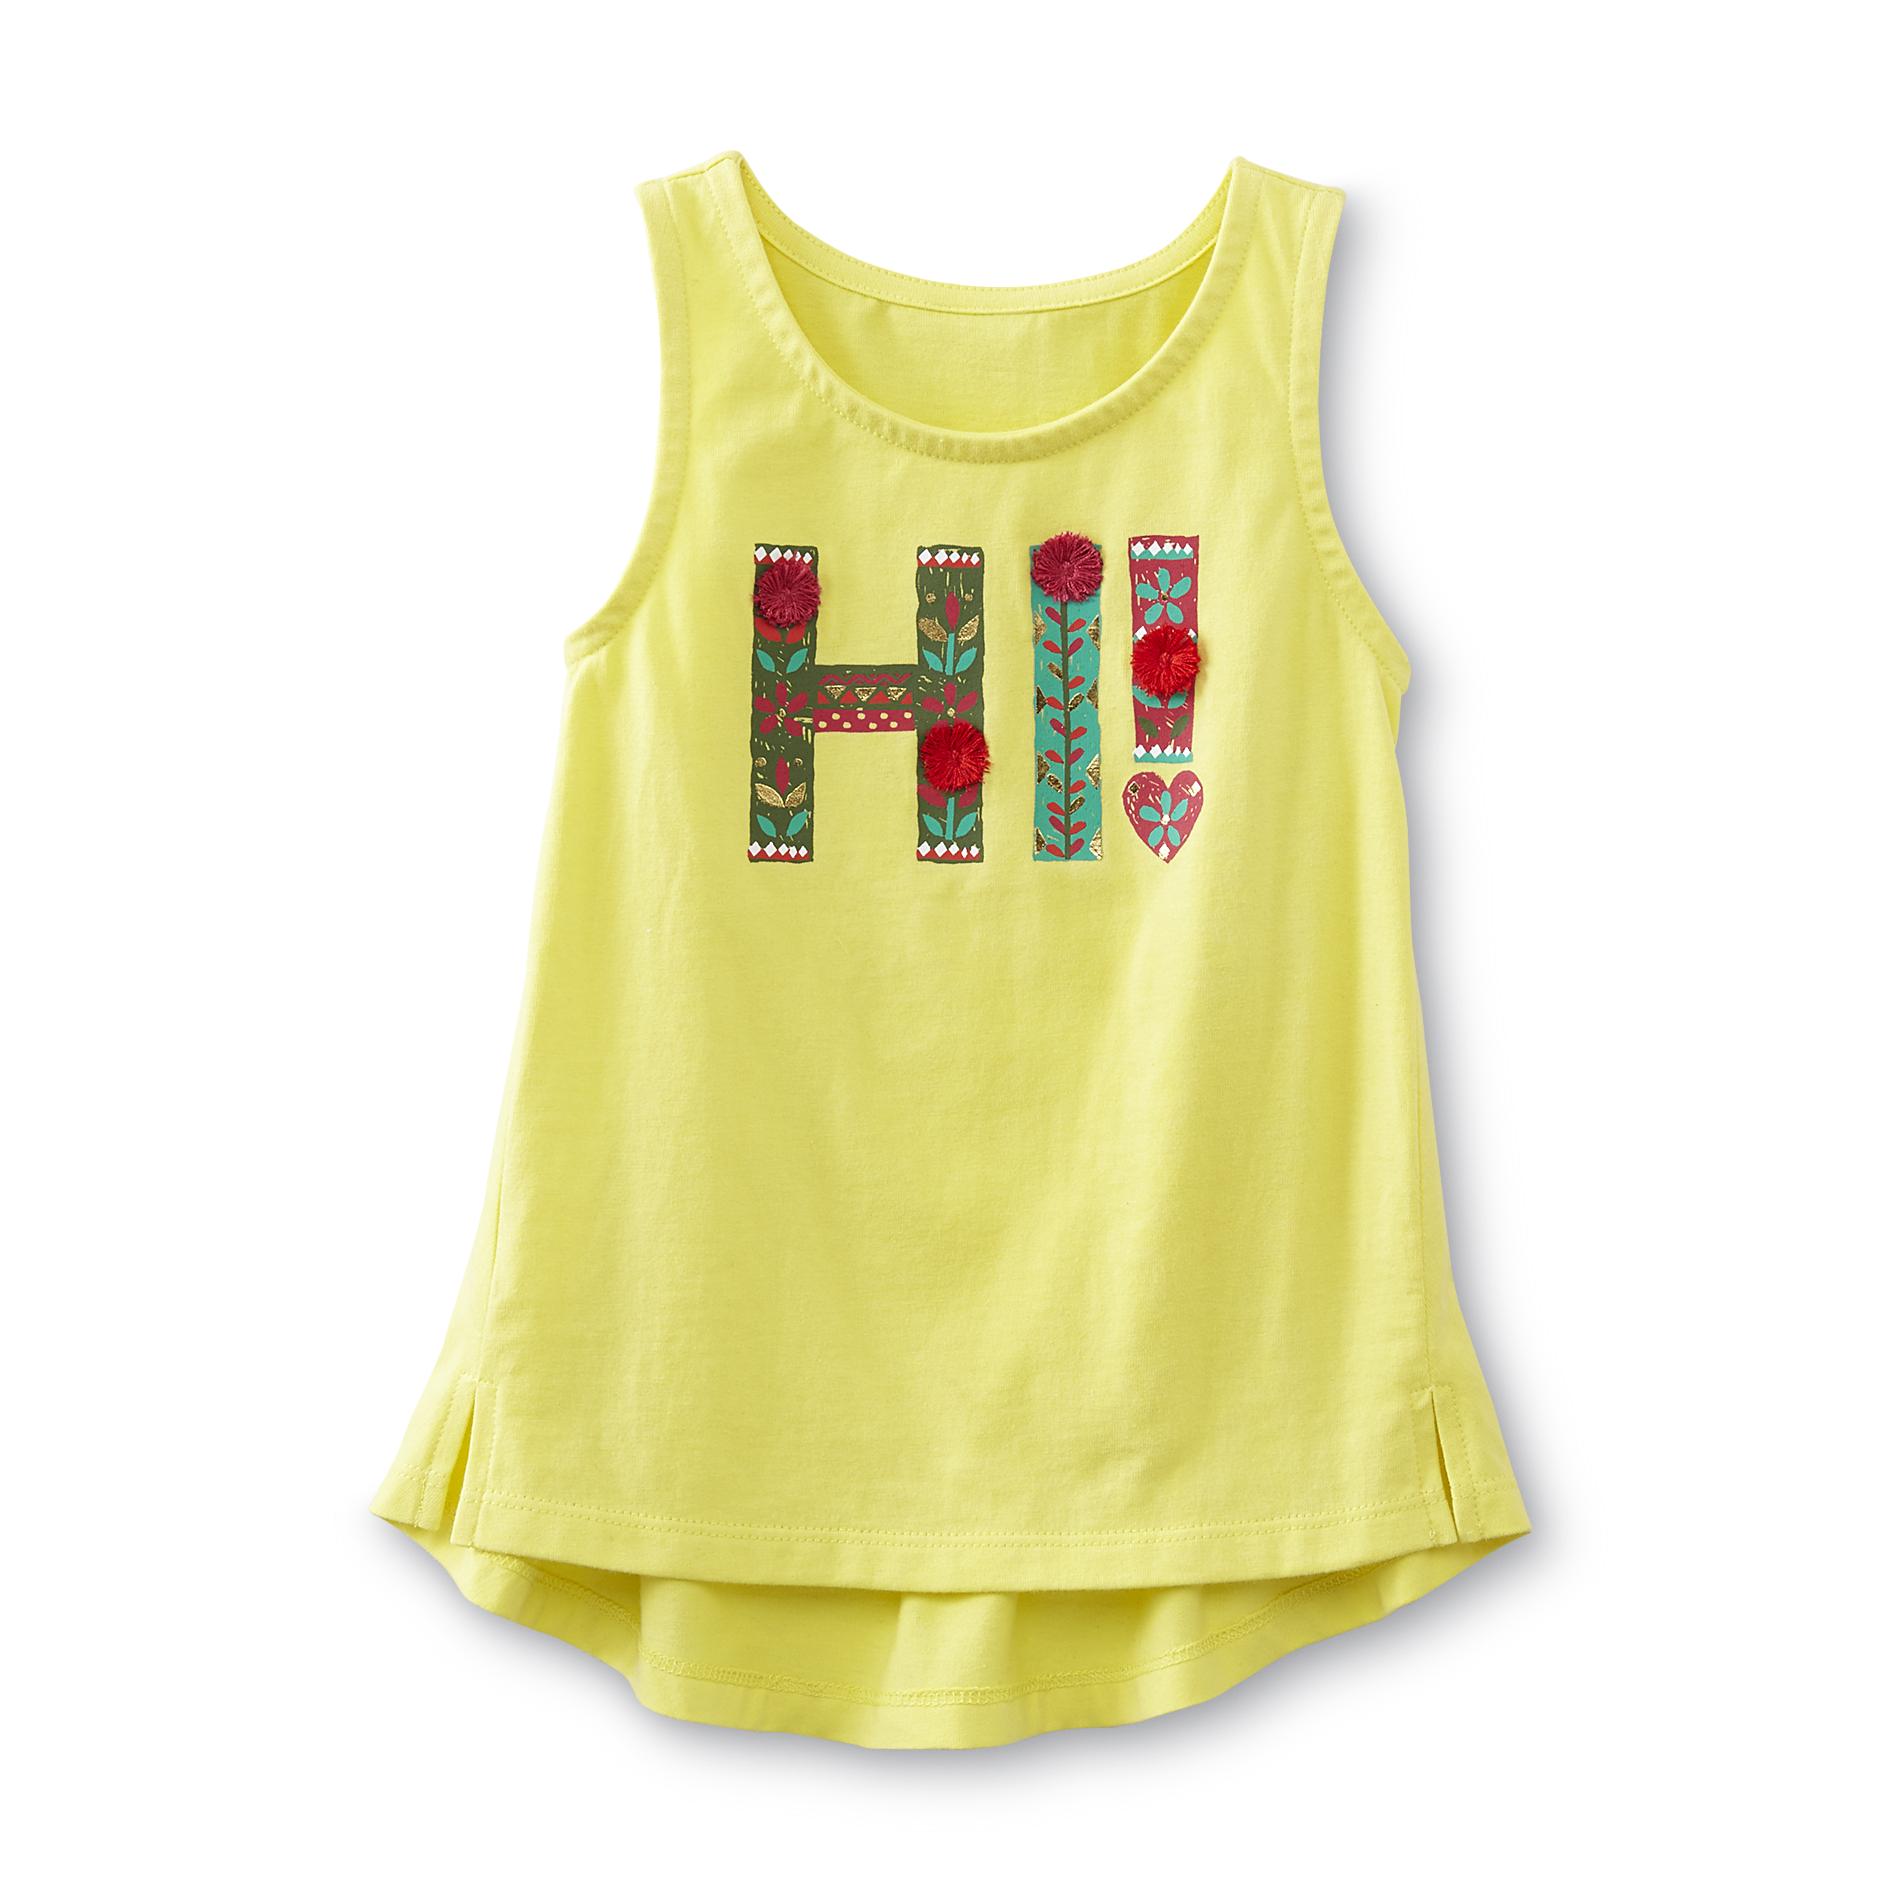 Toughskins Infant & Toddler Girl's Graphic Tank Top - Floral